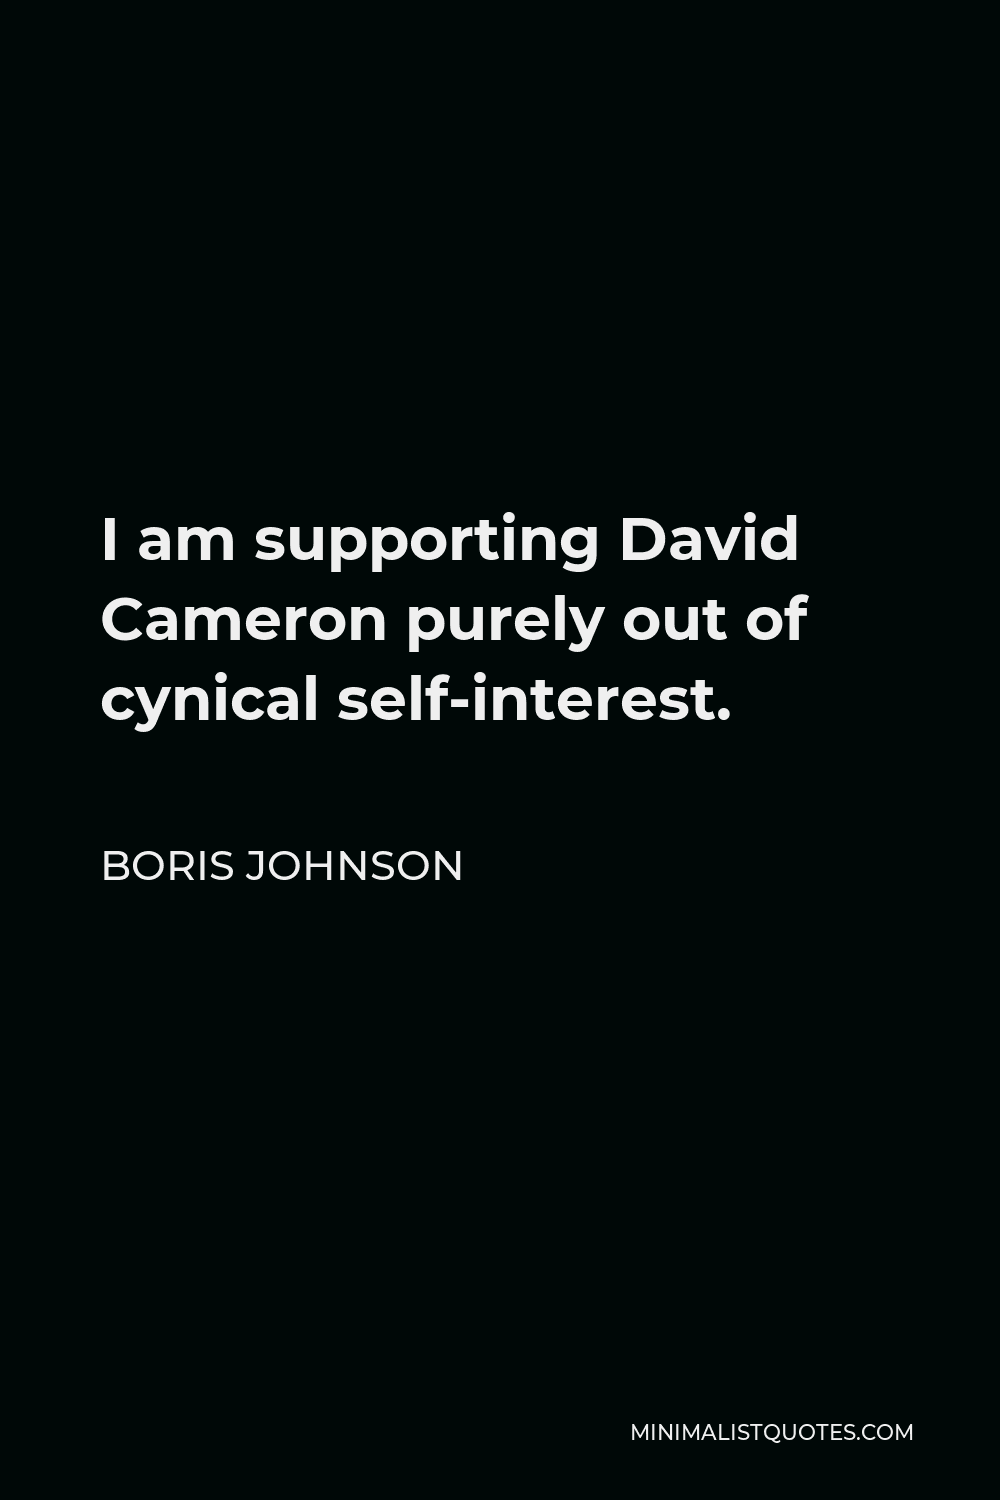 Boris Johnson Quote - I am supporting David Cameron purely out of cynical self-interest.